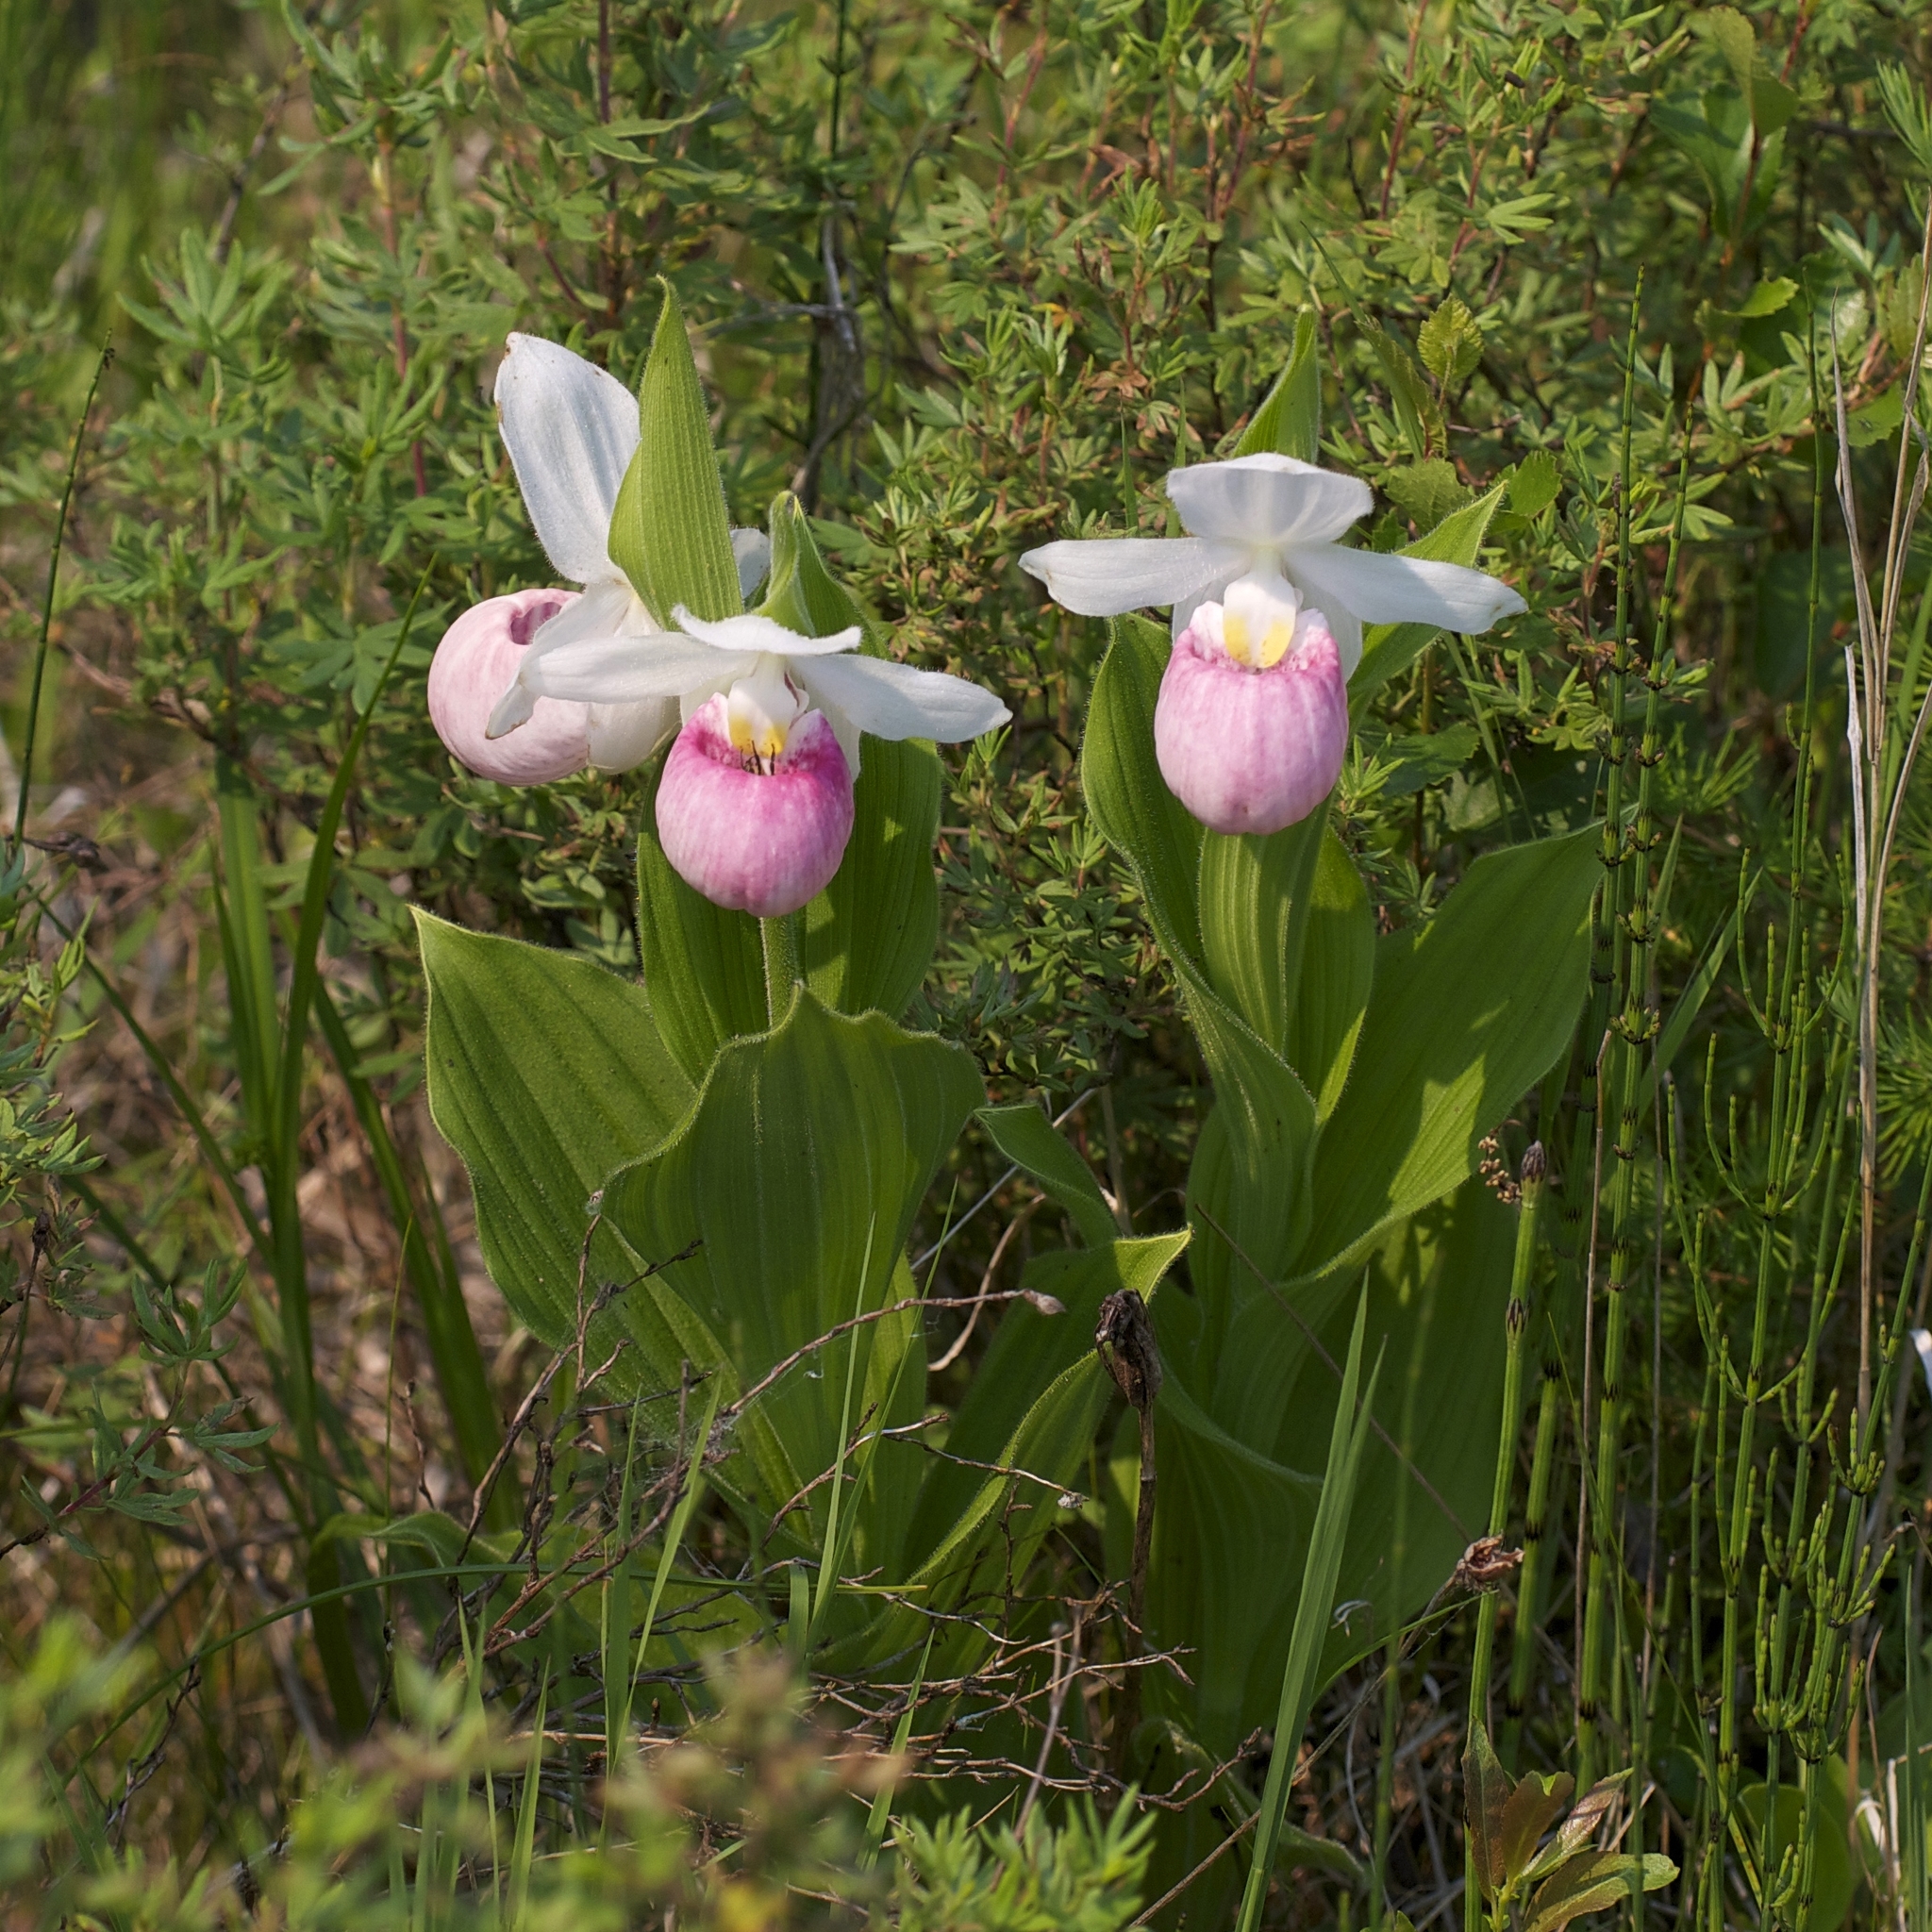 Wetland scene with showy lady's slippers. Three large pink and white flowers are slipper-shaped.